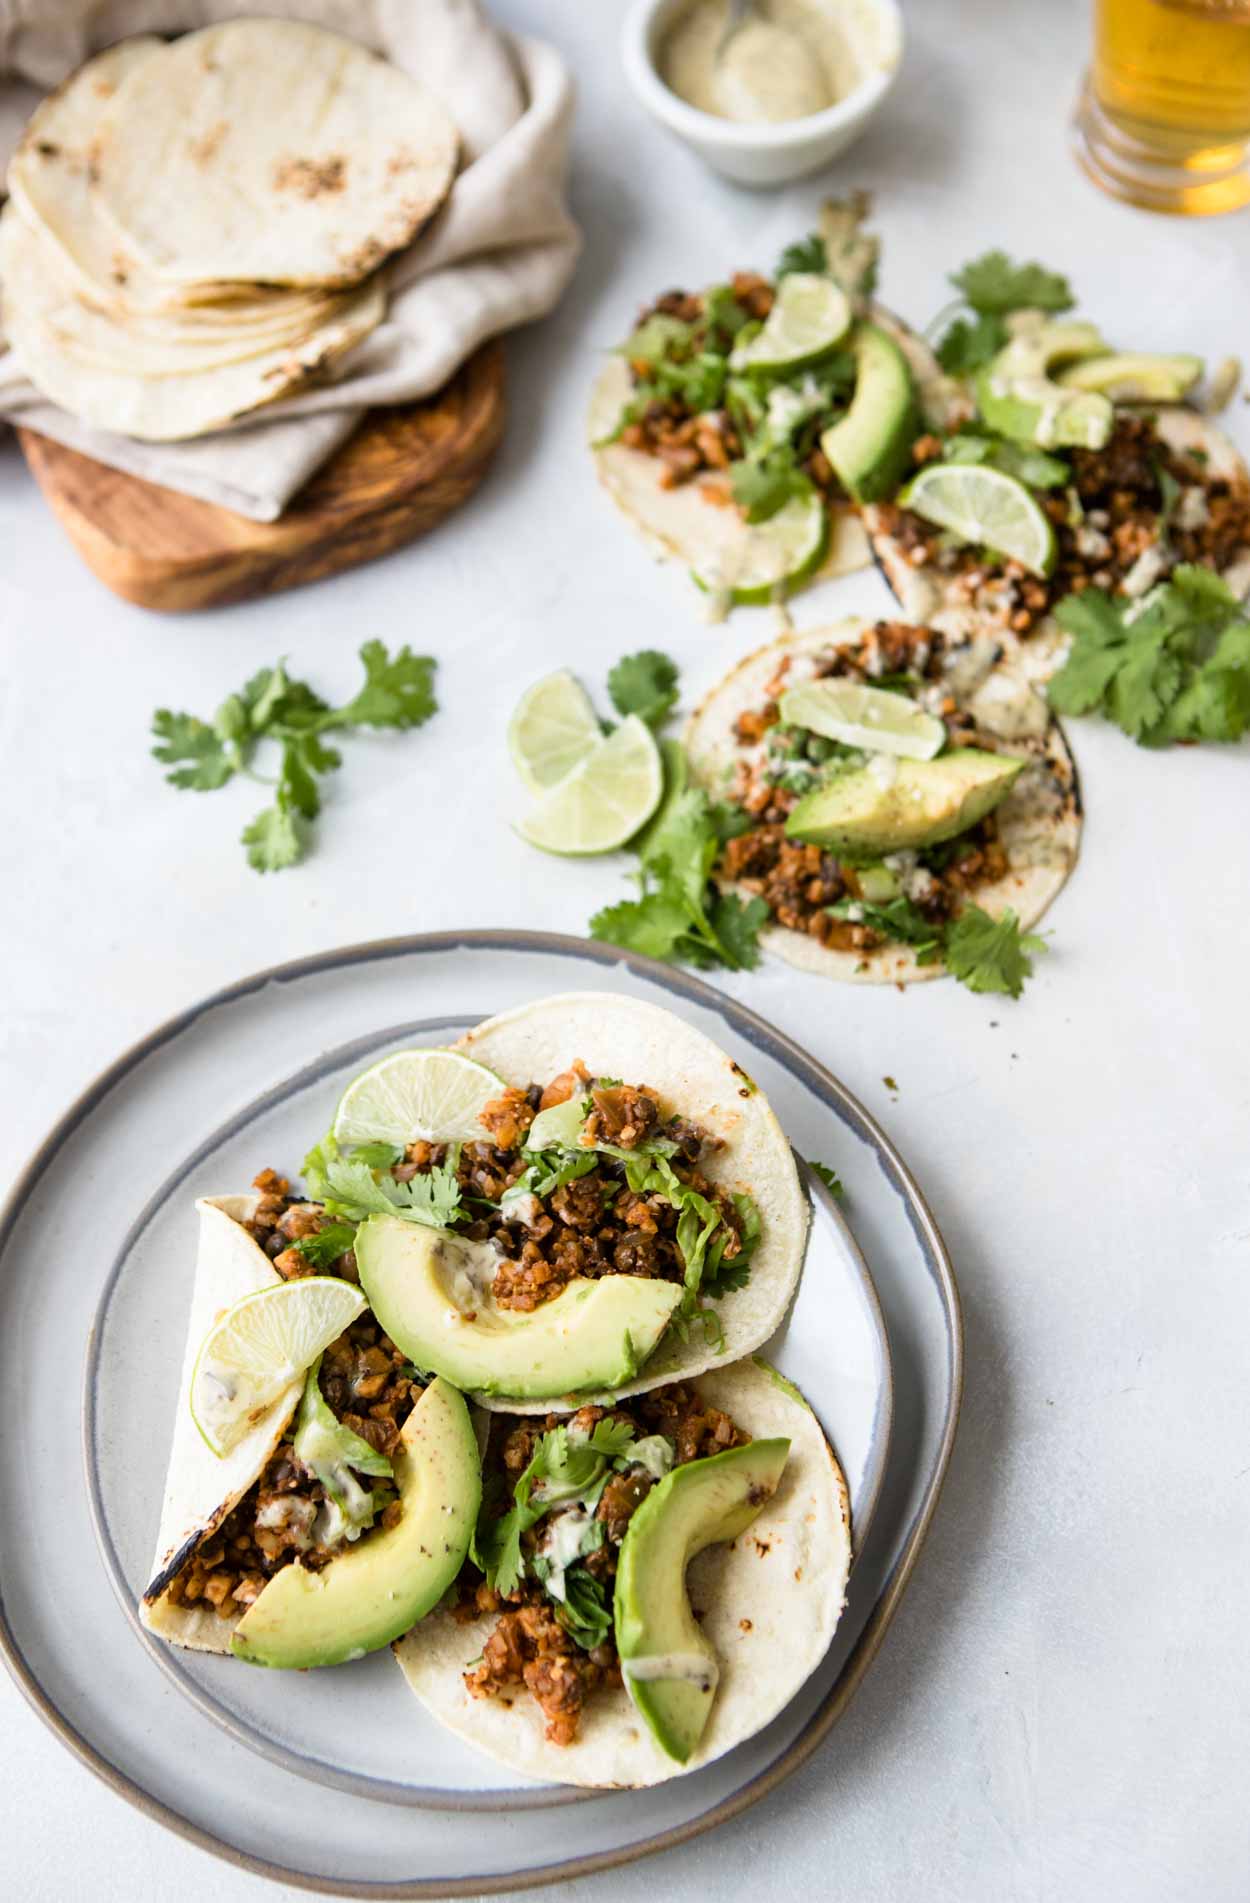 Cauliflower rice tacos with lentils on flour tortillas with cilantro, avocado and limes